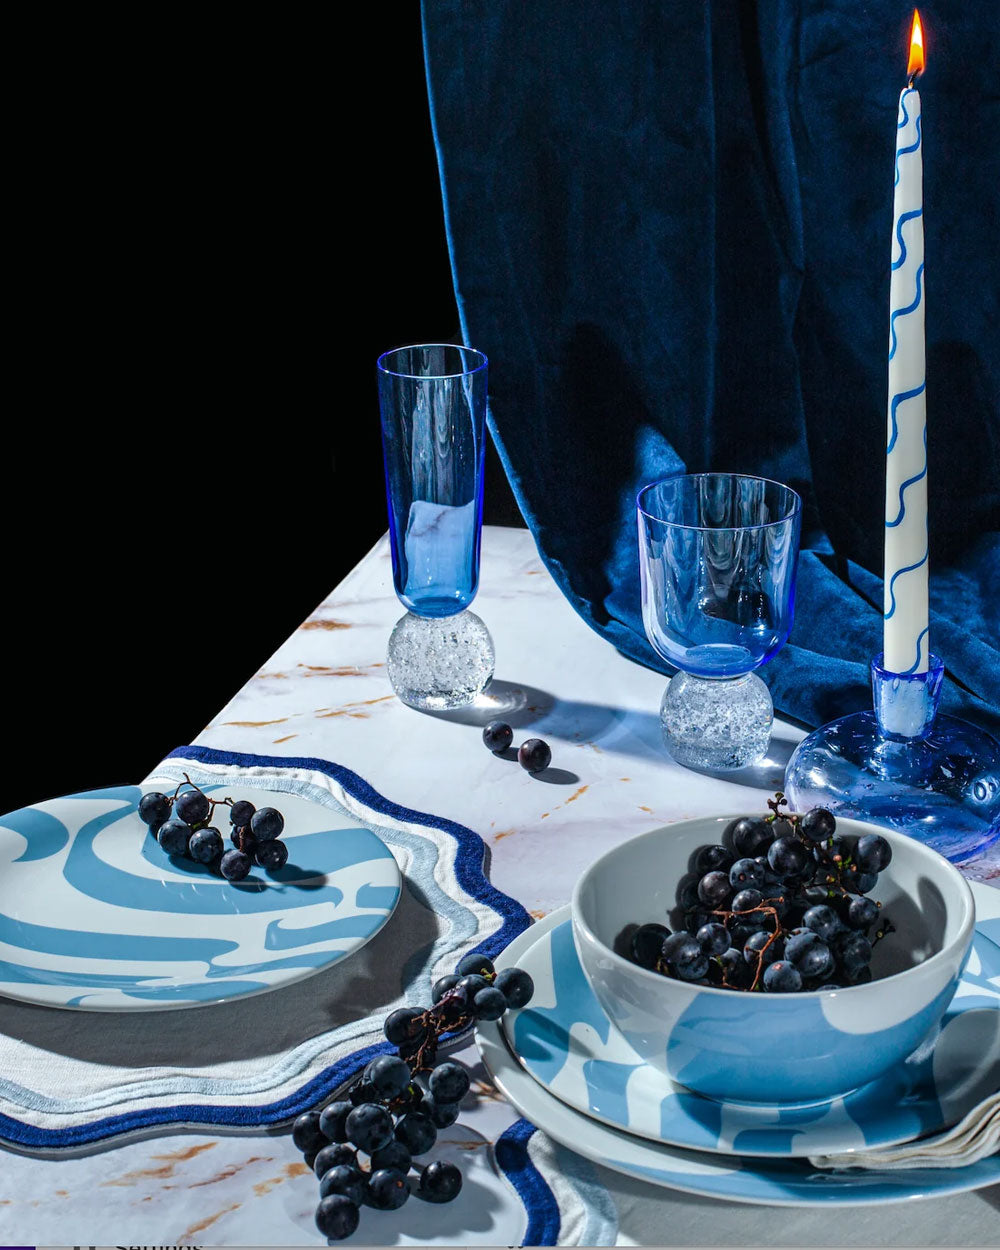 Colorblock Embroidered Linen Placemats in Blue